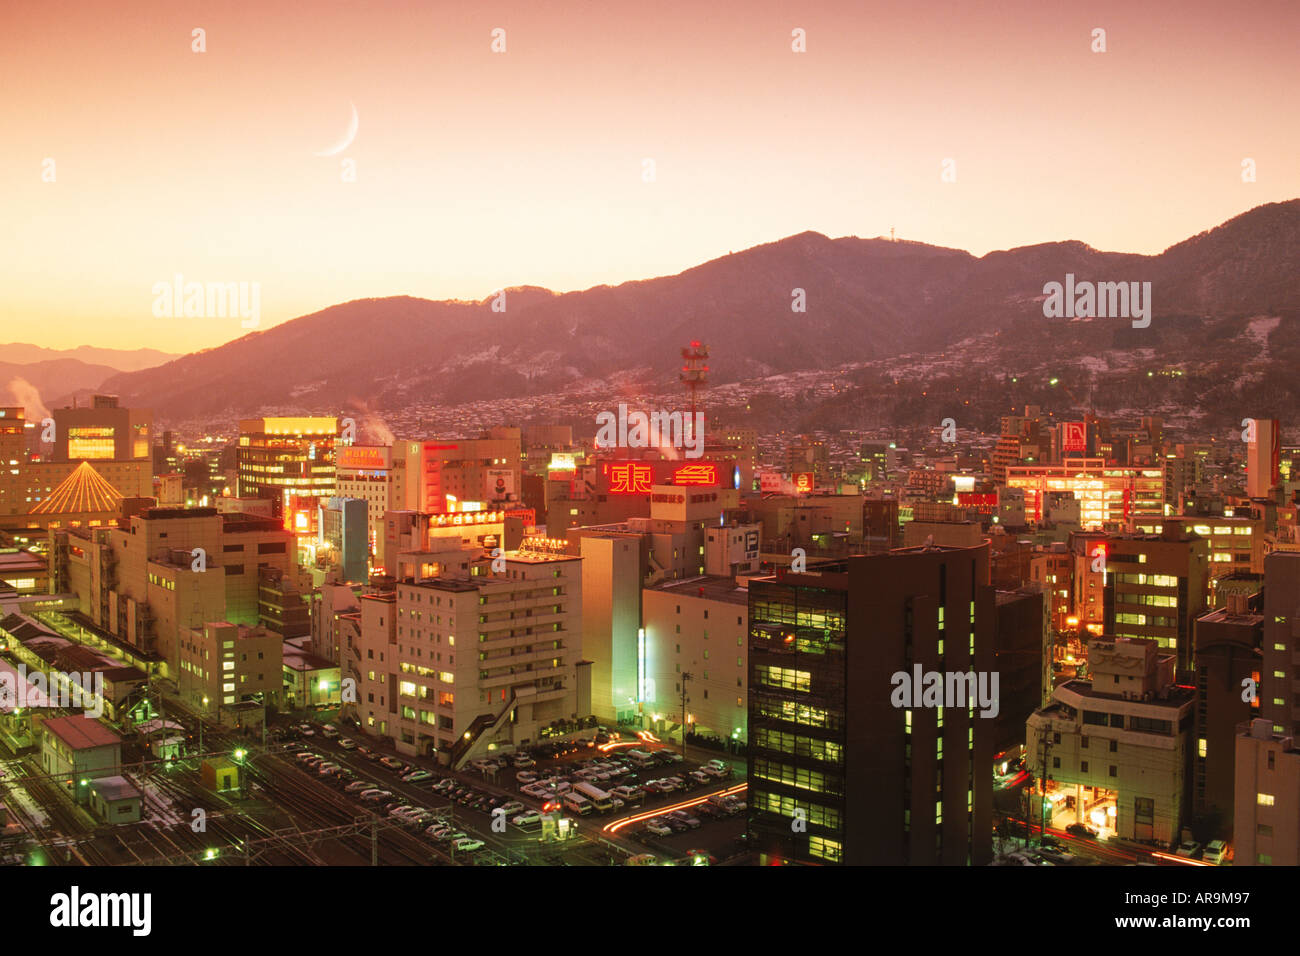 Overview of Nagano and surrounding mountains on Honshu Island in Japan at dusk Stock Photo